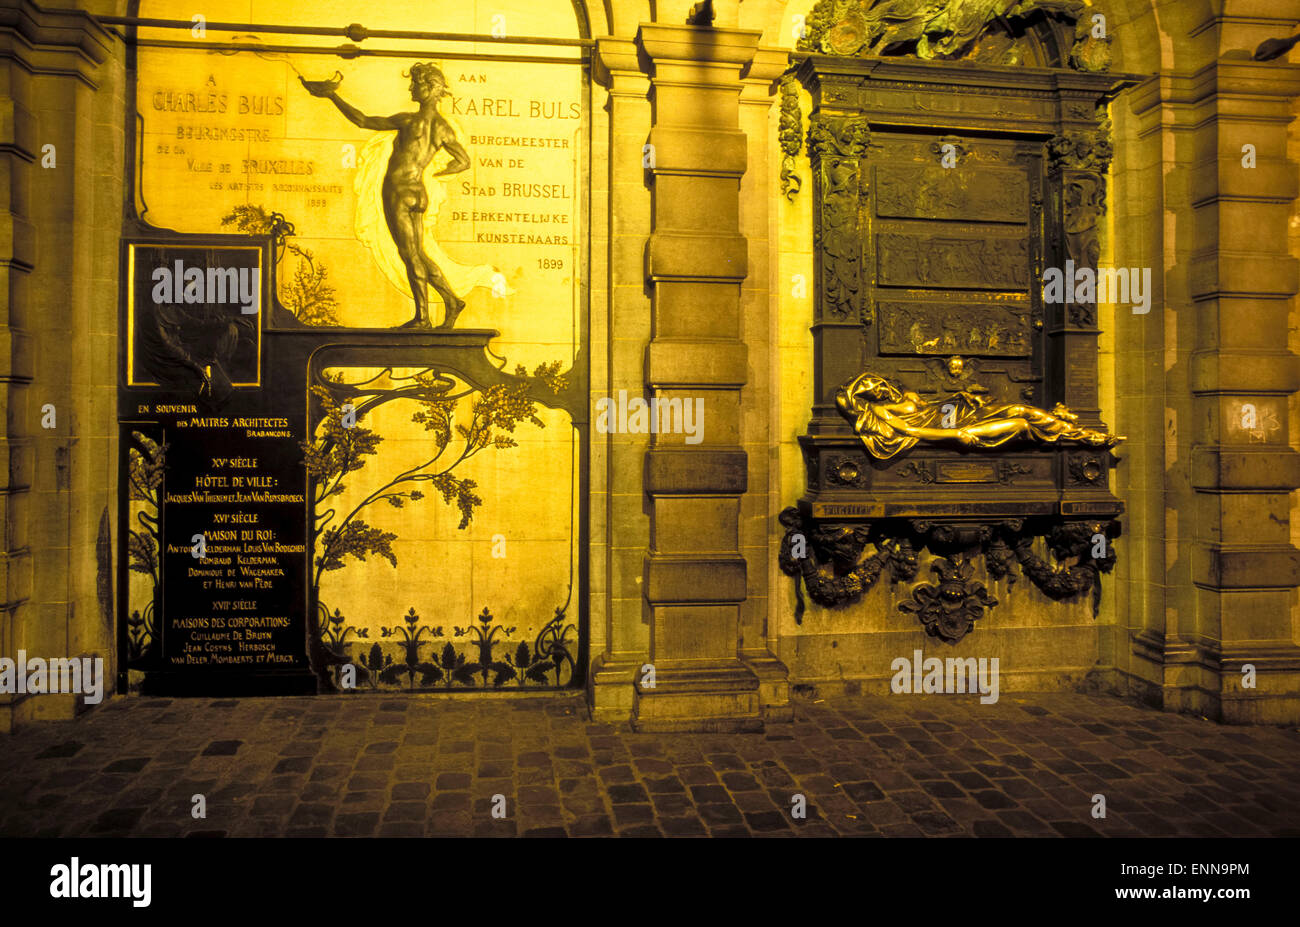 BEL, Belgium, Brussels, commemorative plaque for the former mayor Karel Buls and the bronze sculpture of Everard't Serclaes at t Stock Photo